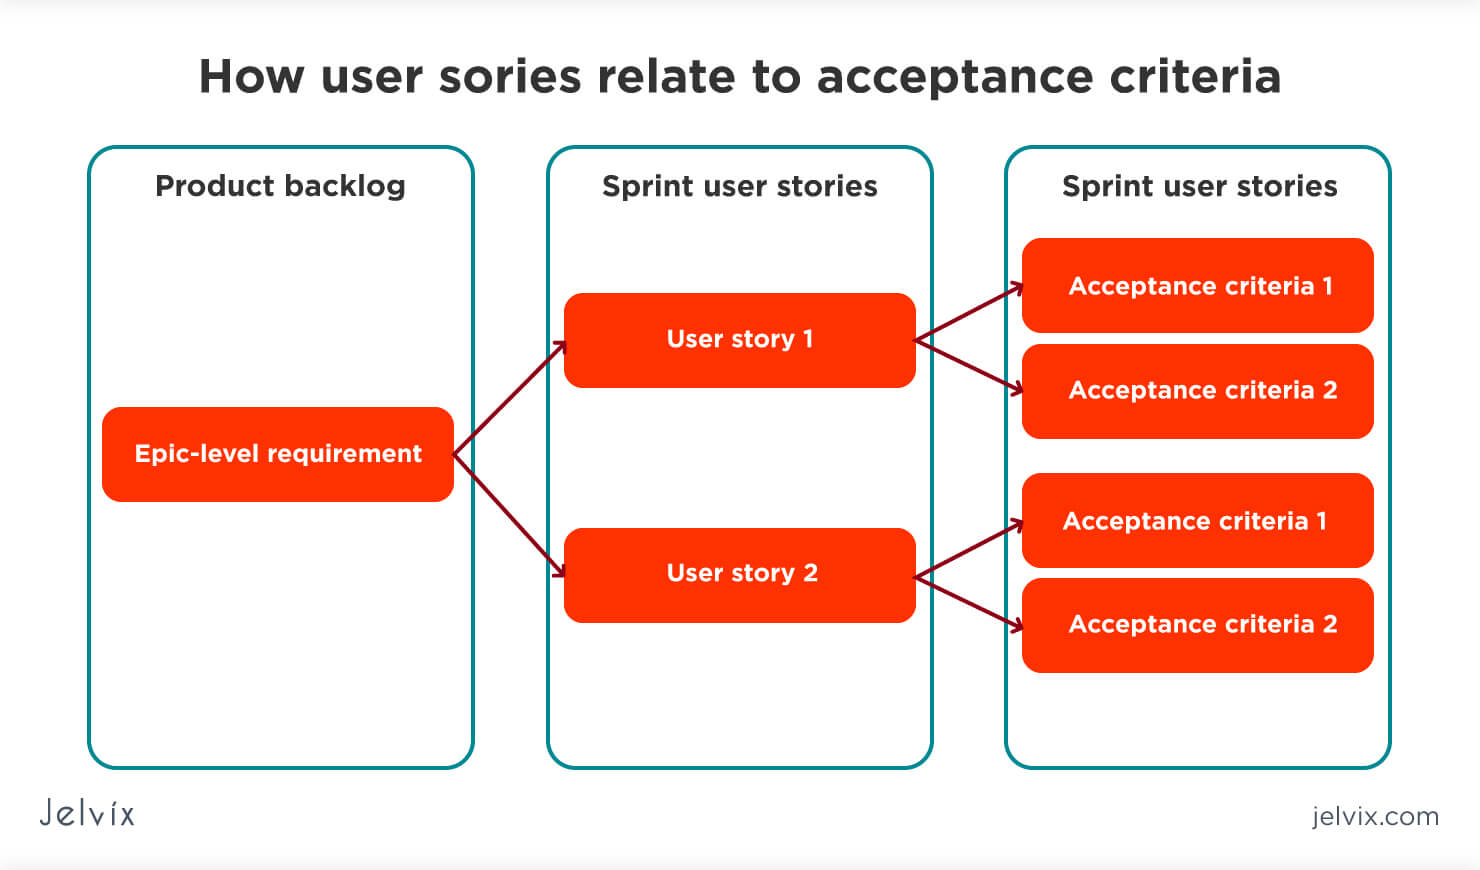 what methodology is recommended for writing quality user stories